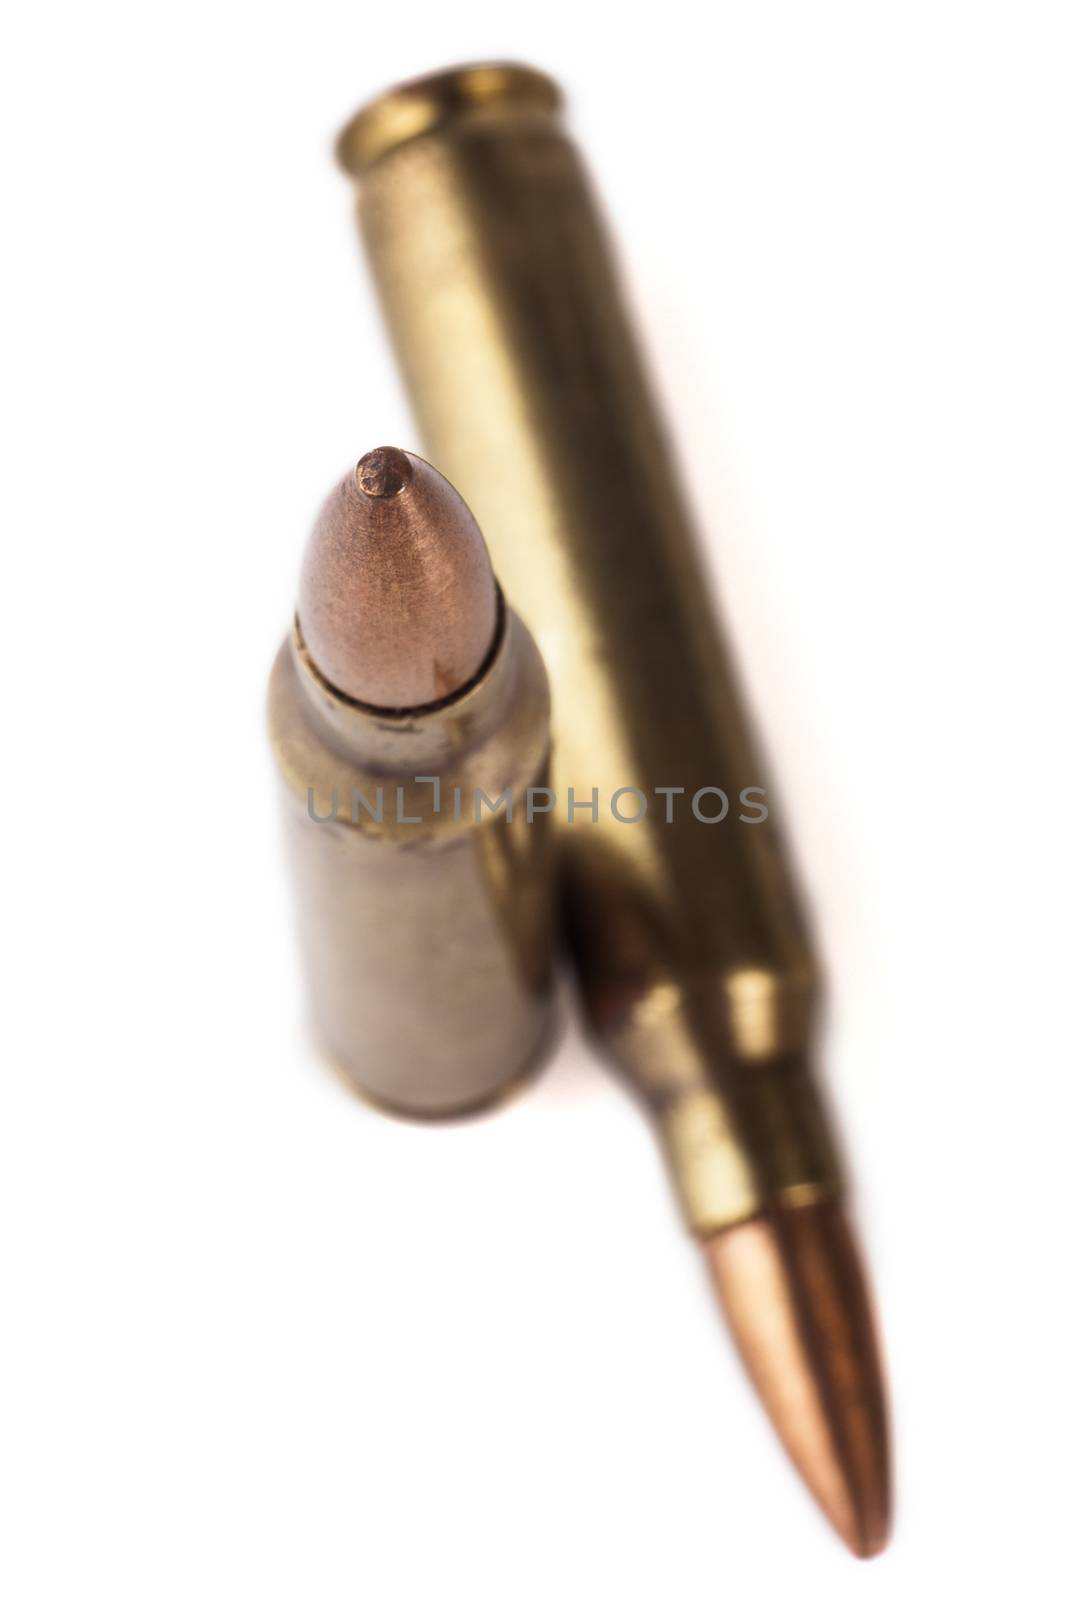 Rifle Bullets Isolated on White by orcearo